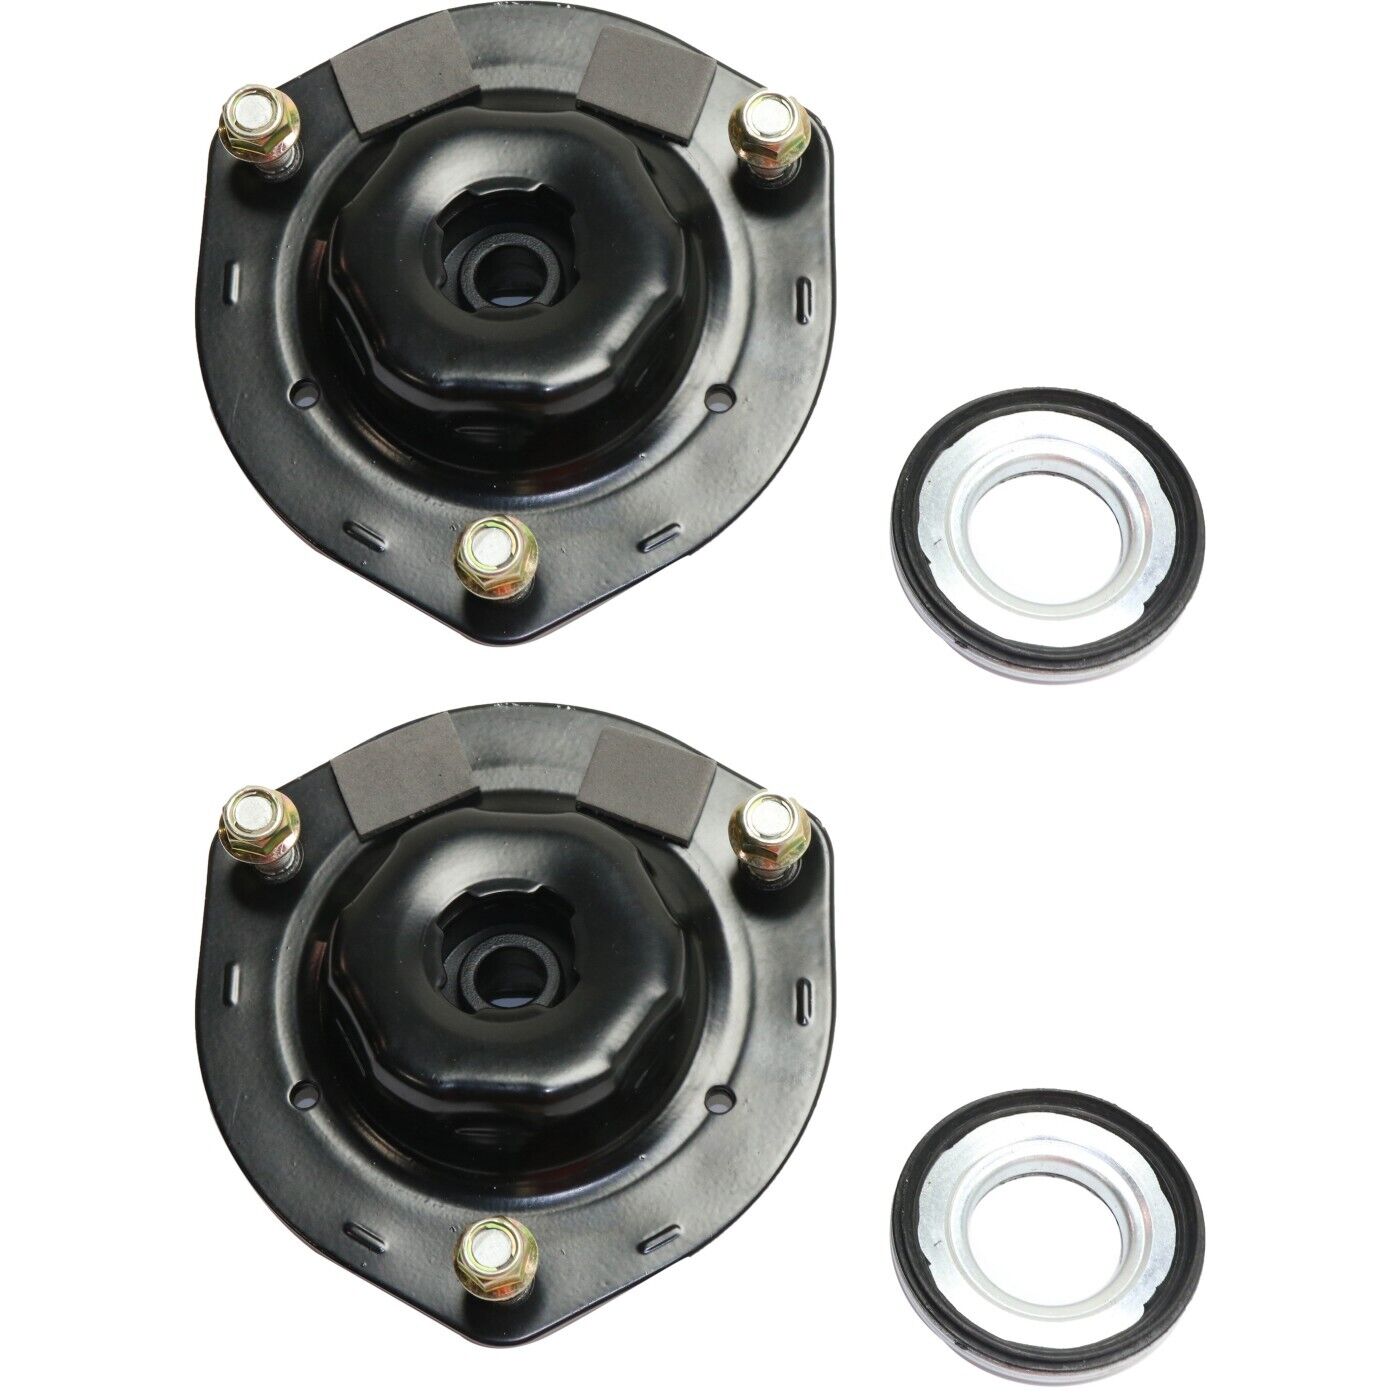 Shock and Strut Mount Set For 02-06 Toyota Camry Sienna 07-11 Lexus RX350 Front